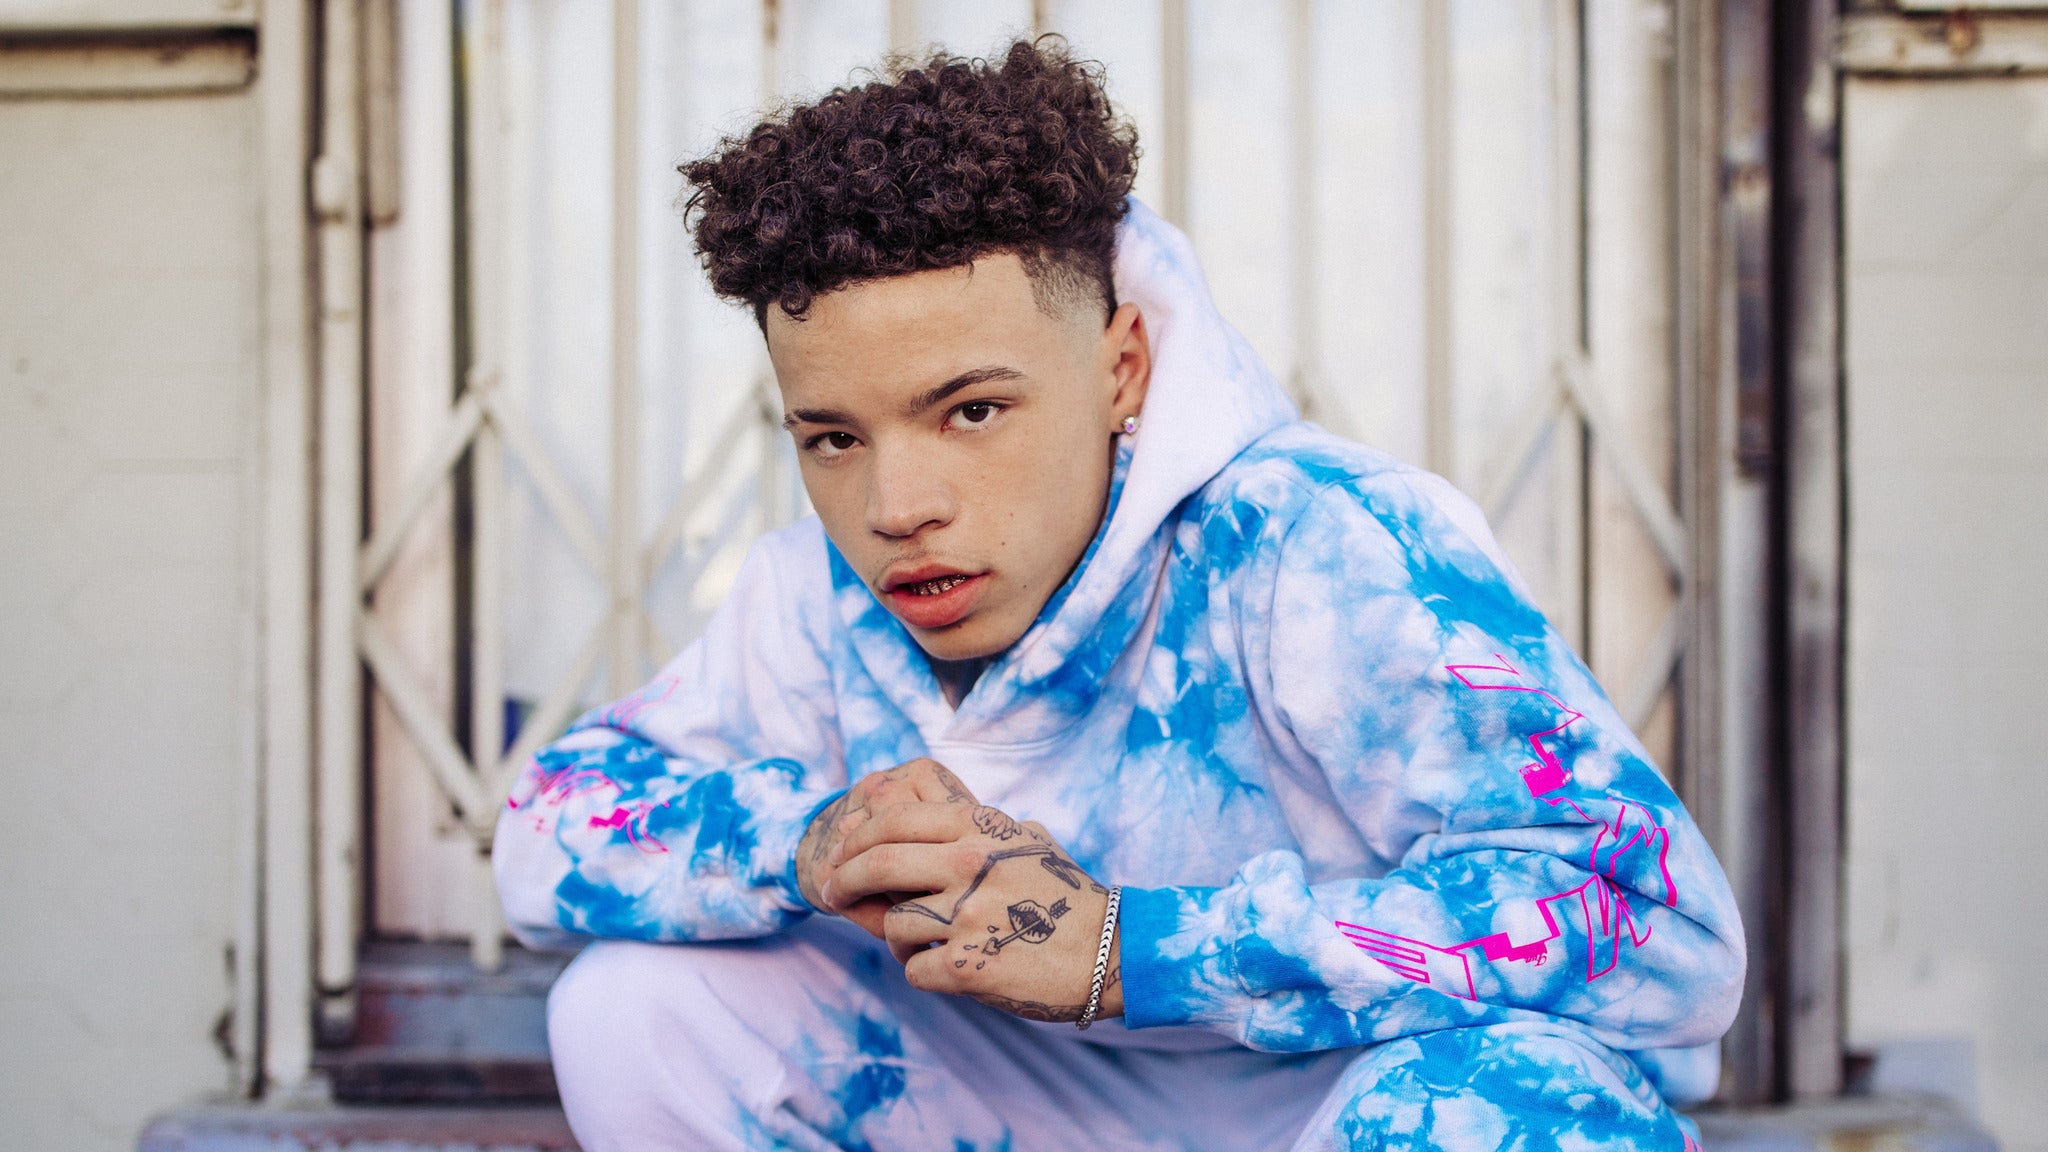 Lil Mosey - Certified Hitmaker North American Tour 2020 in San Diego promo photo for Official Platinum presale offer code